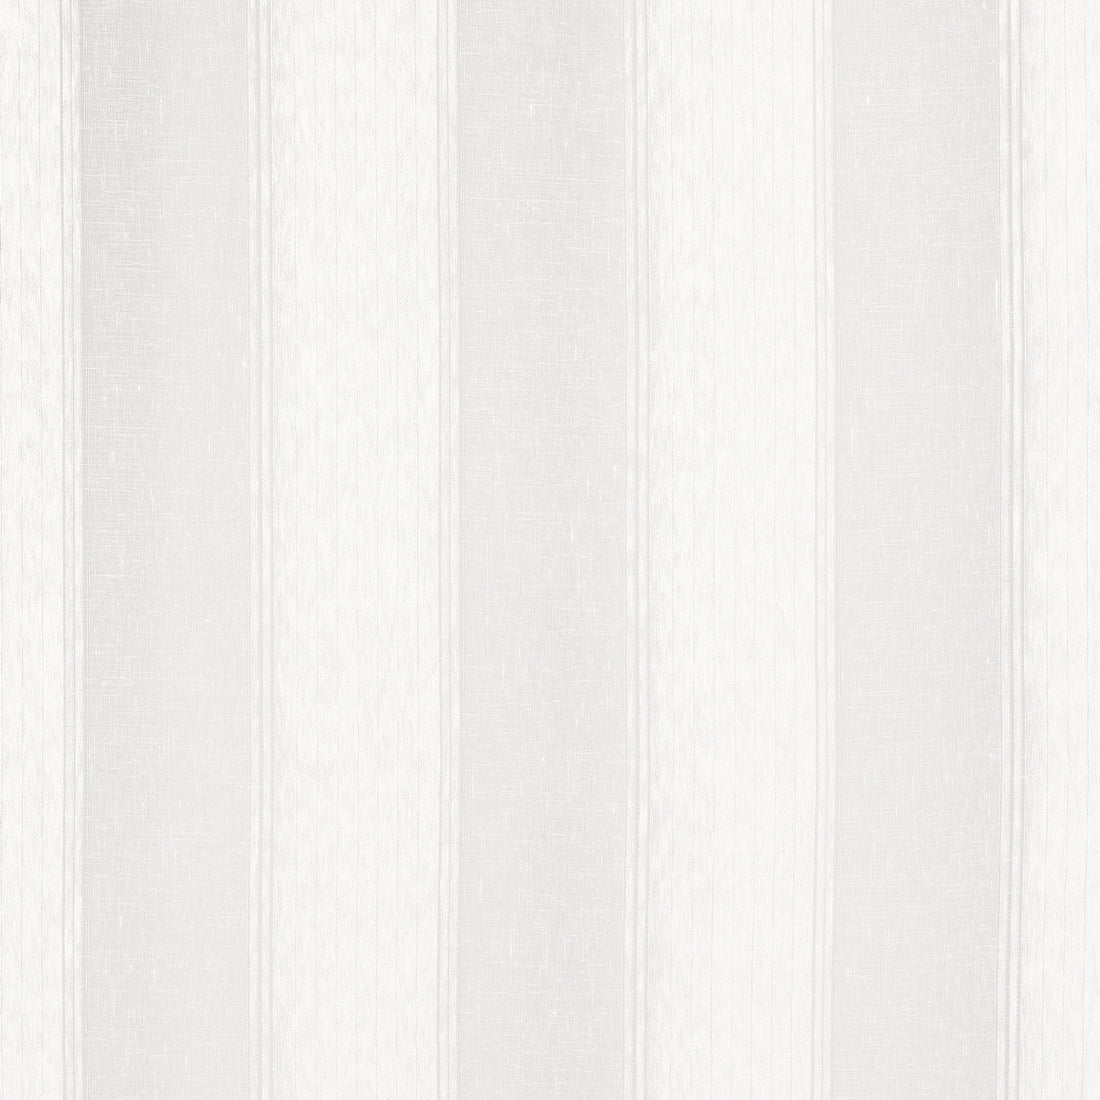 Andover Stripe fabric in ivory color - pattern number FWW7108 - by Thibaut in the Atmosphere collection